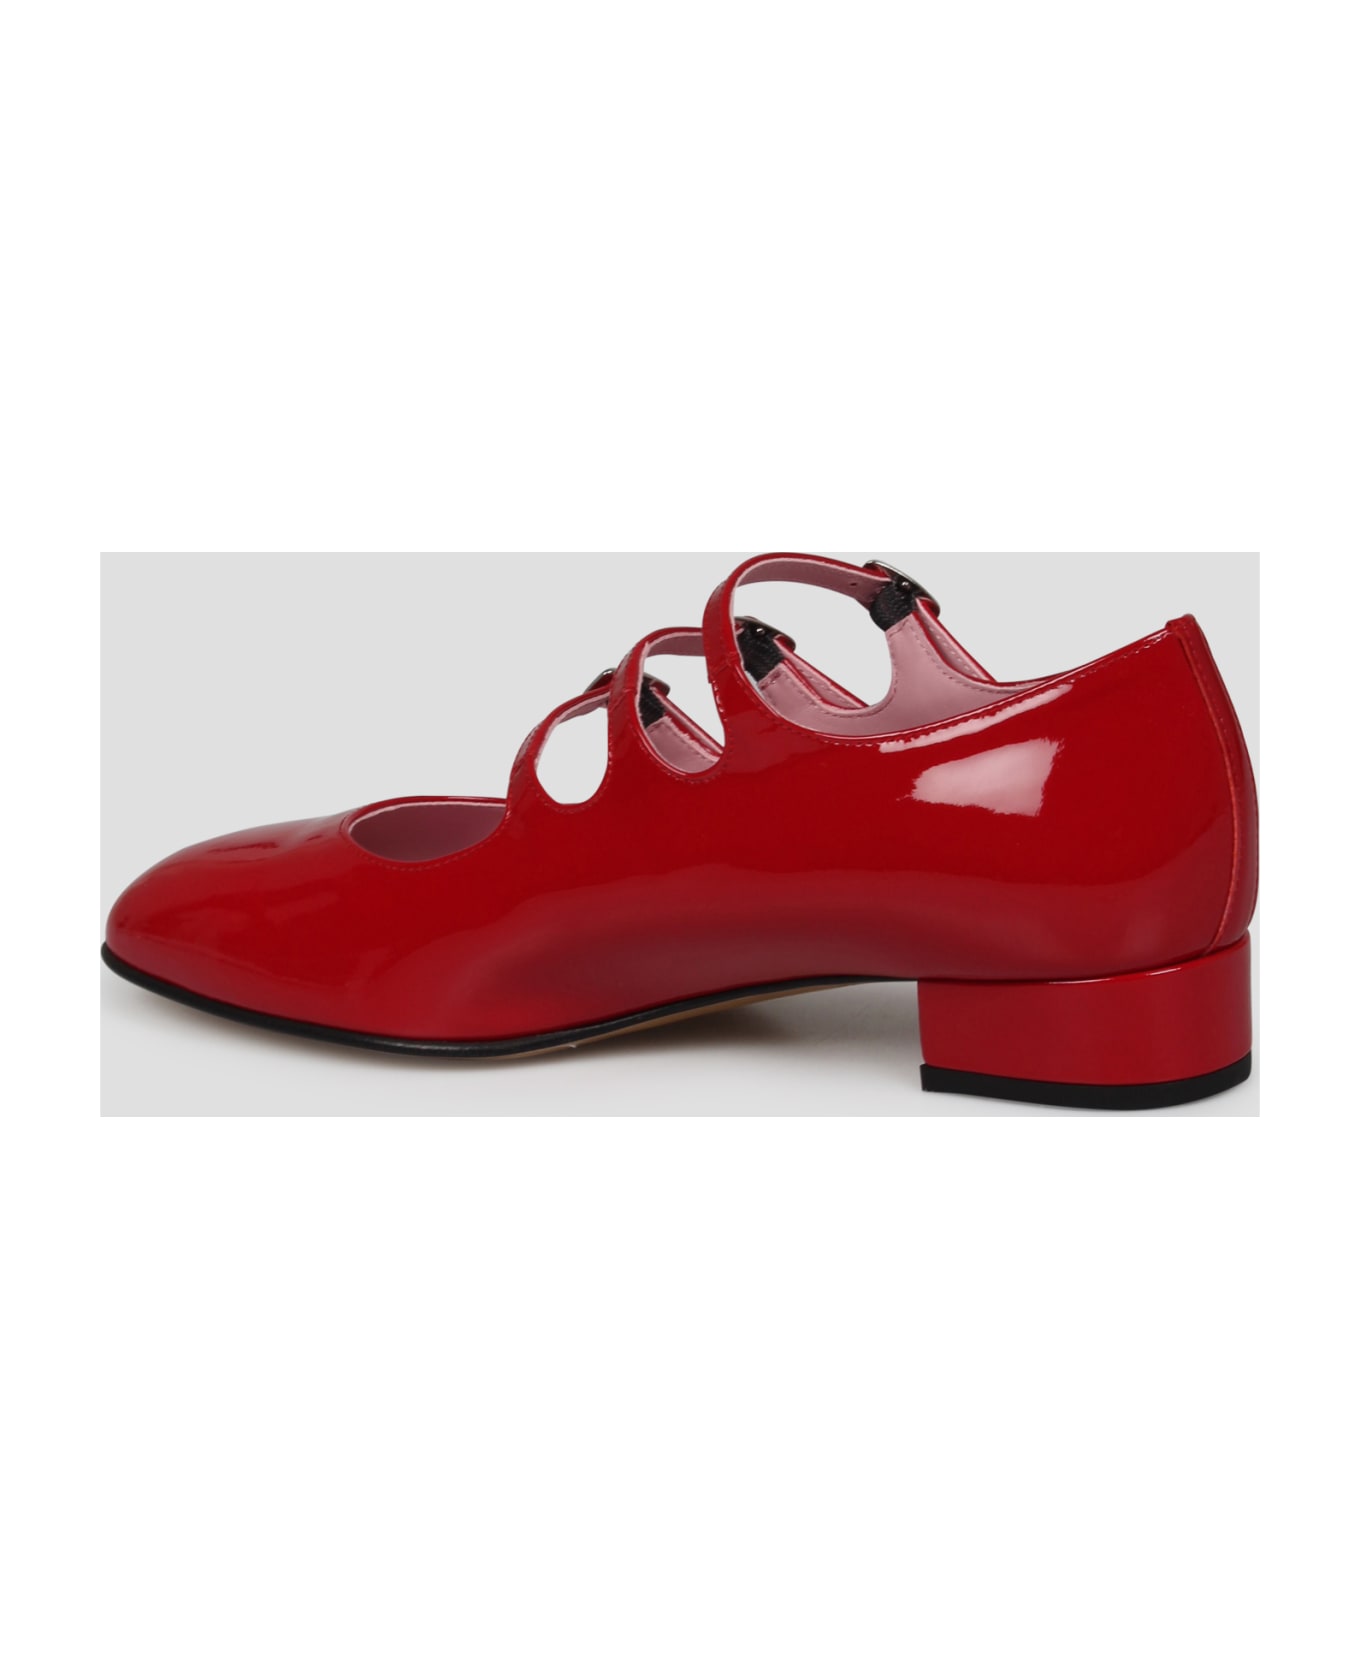 Carel Ariana Mary Jane Pumps - Red フラットシューズ